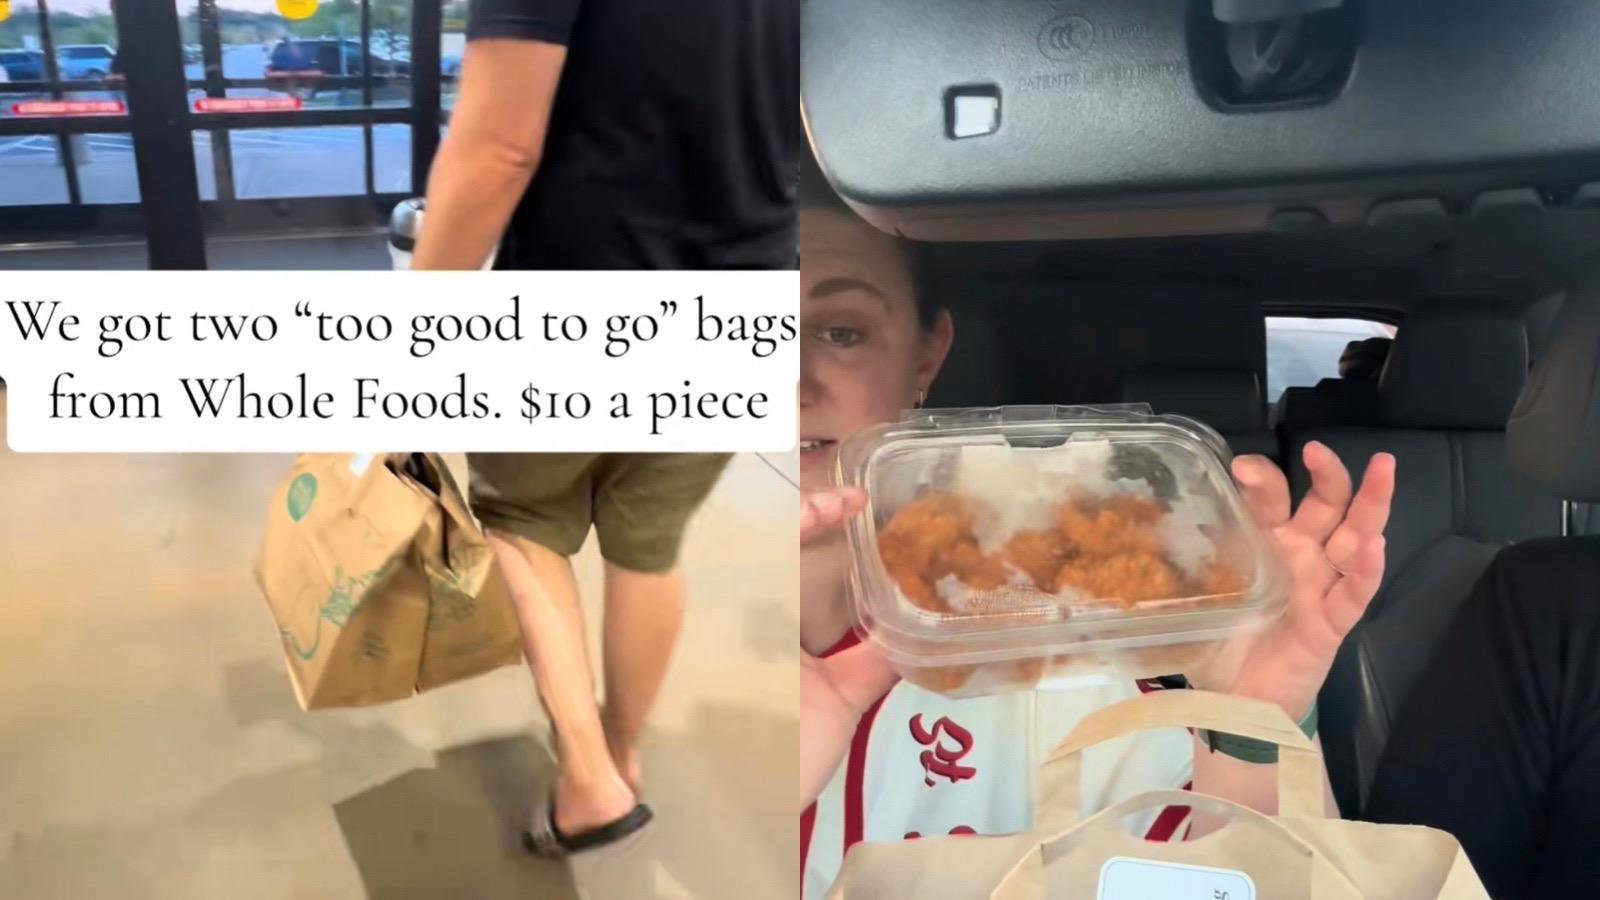 whole foods too good to go bag under $10